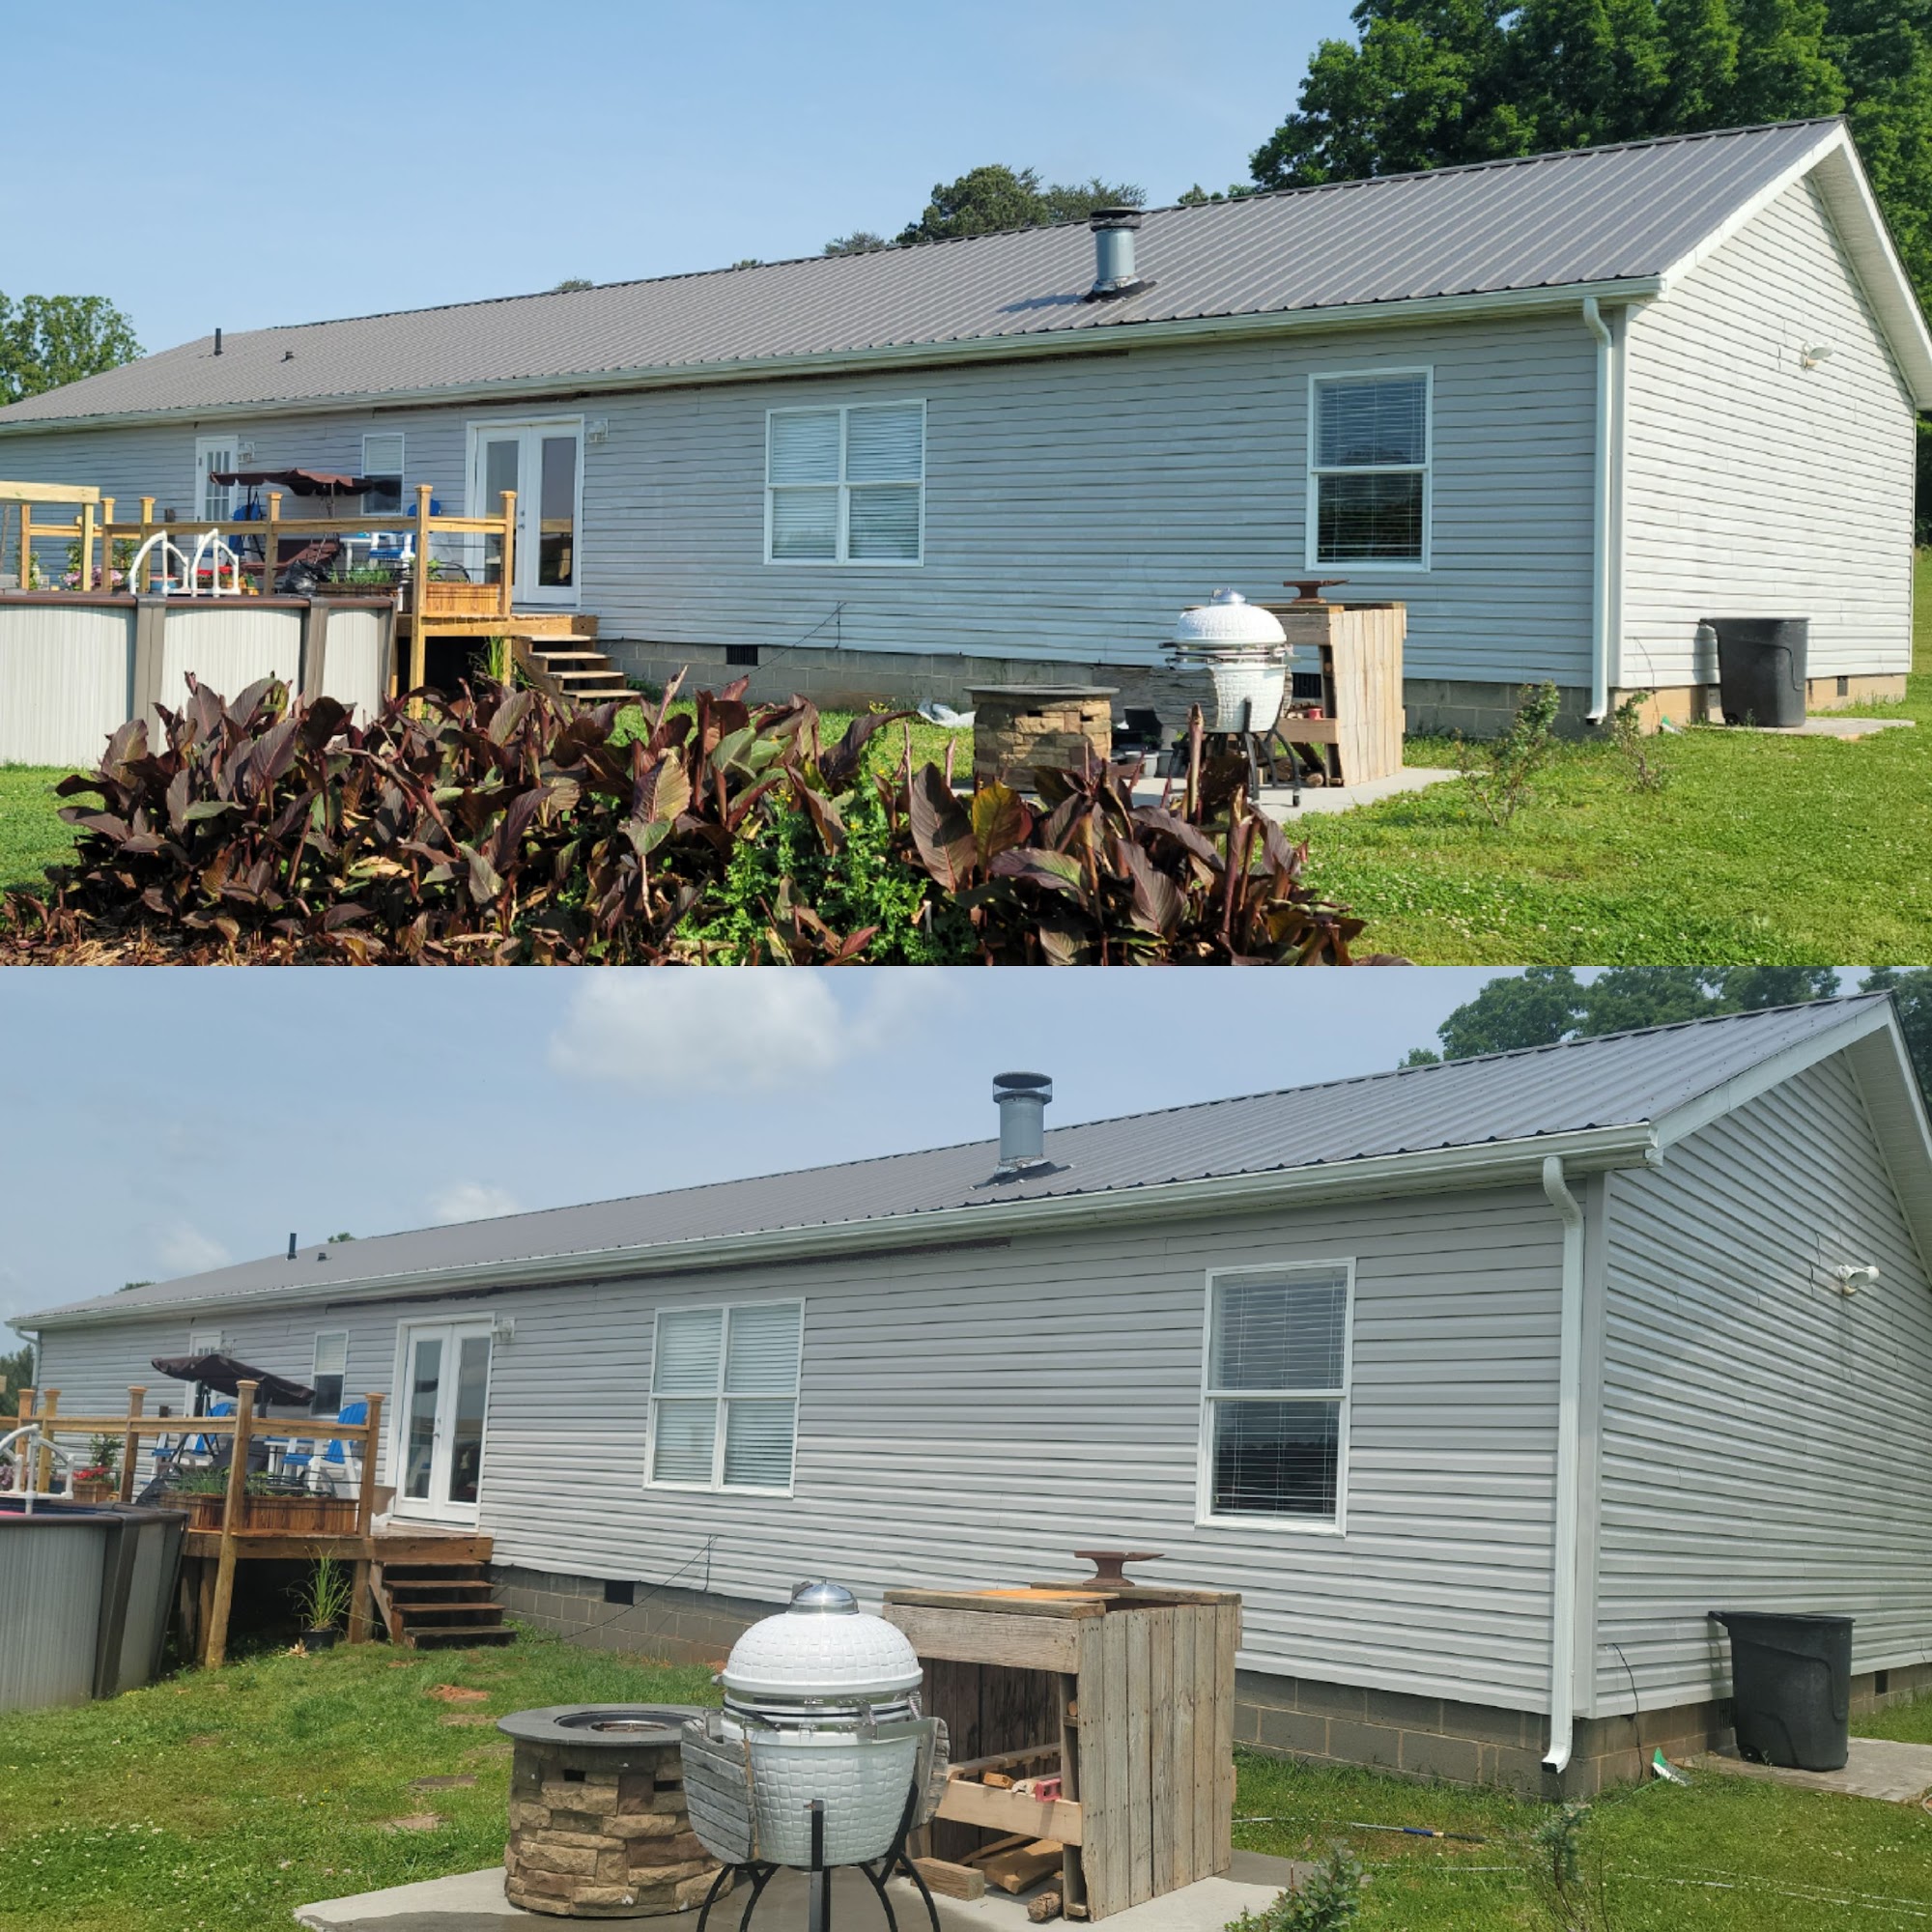 A B & D's Pressure Washing Services, LLC 404 Highland Ave Unit A, Loudon Tennessee 37774